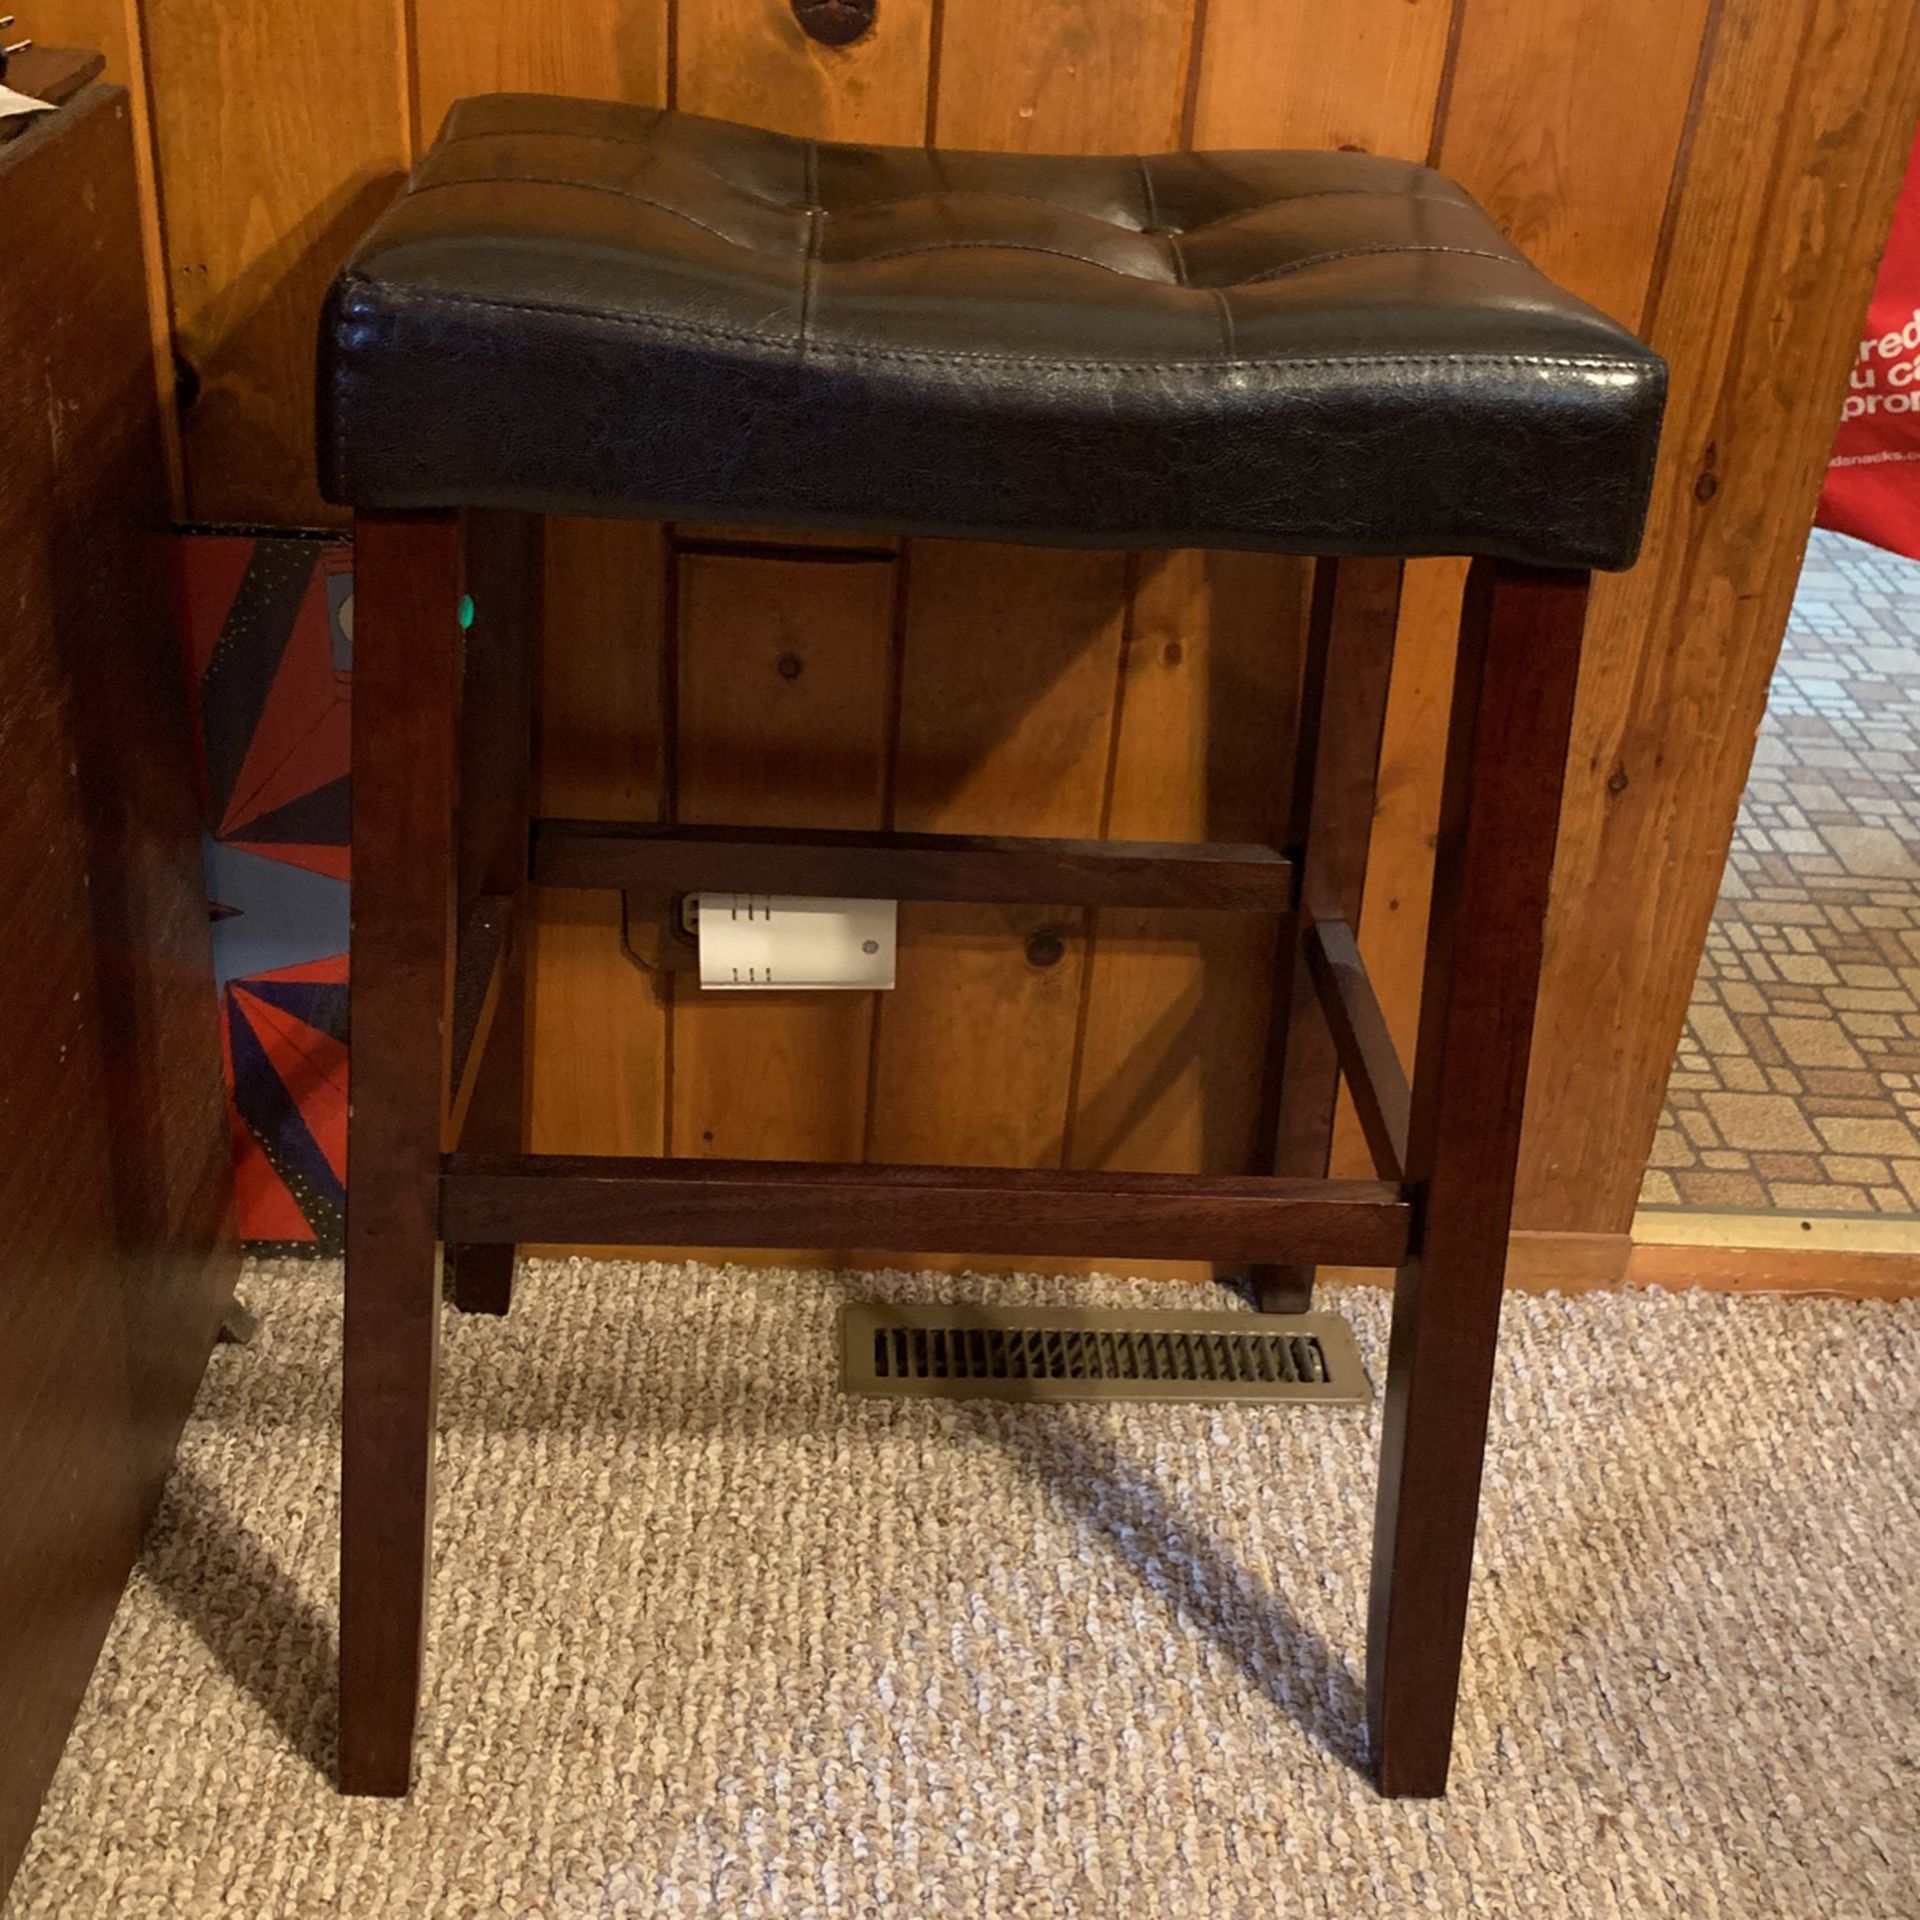 4 stools  For $120 Or $35 A Piece 